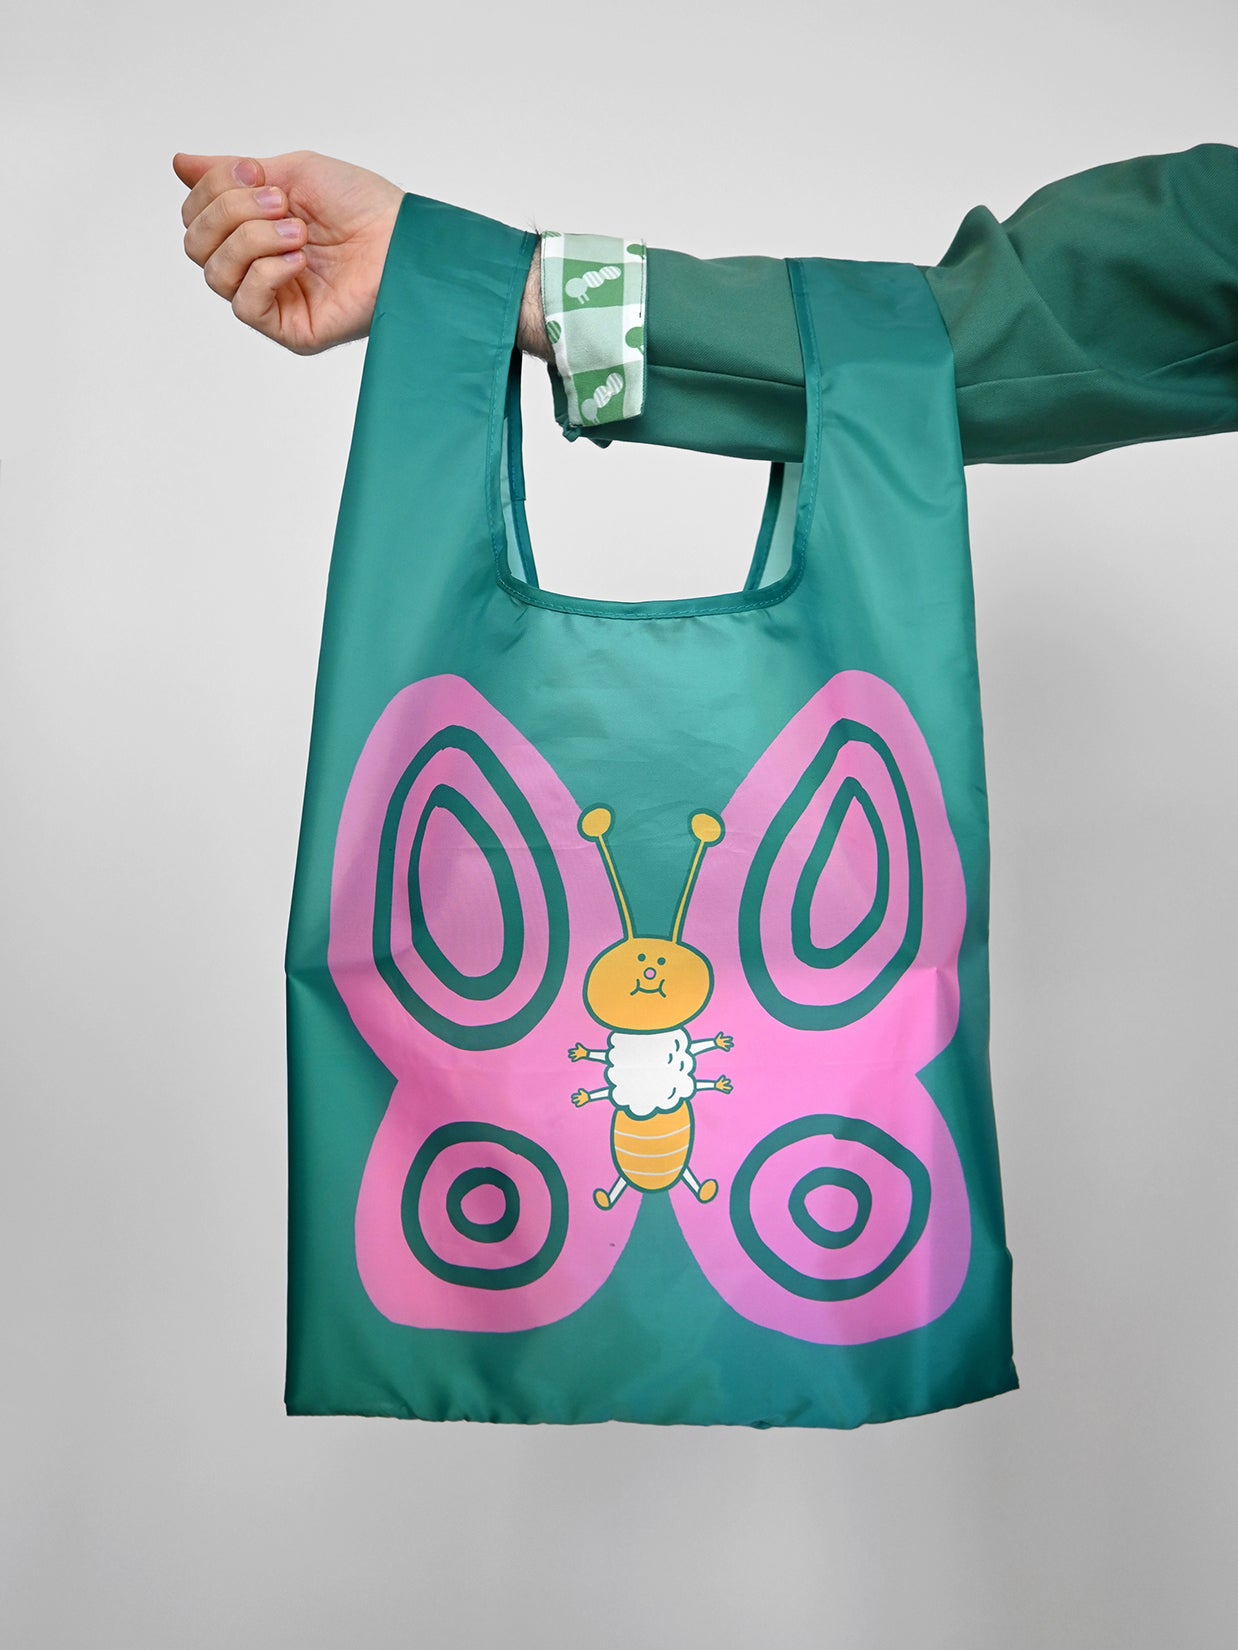 "Mighty Morphing" Reusable Bag. Design by HO HOS HOLE IN THE WALL